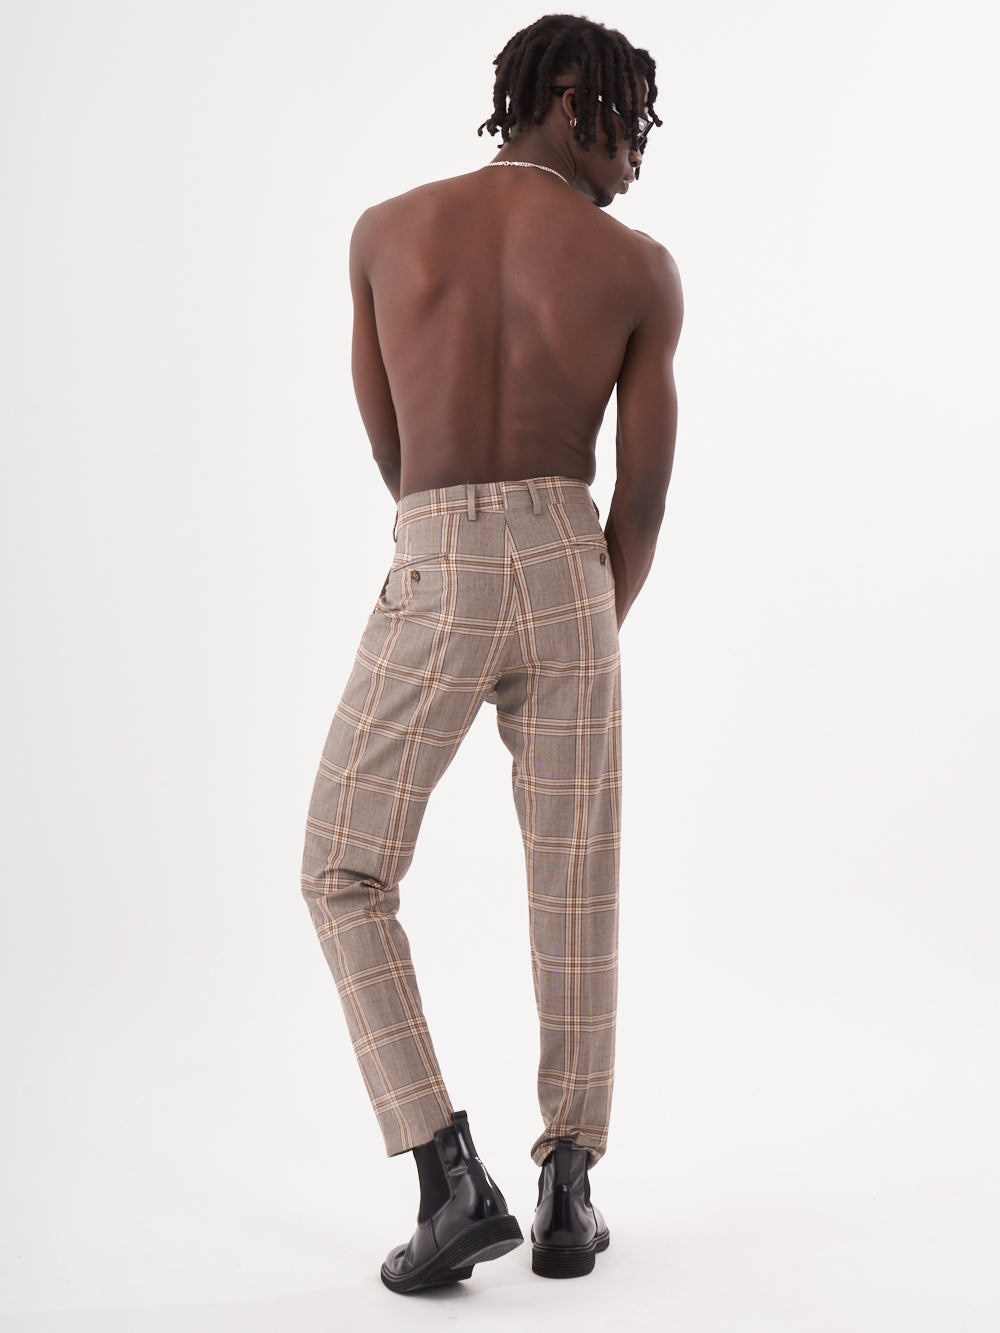 The back view of a man wearing ROOK PANTS.